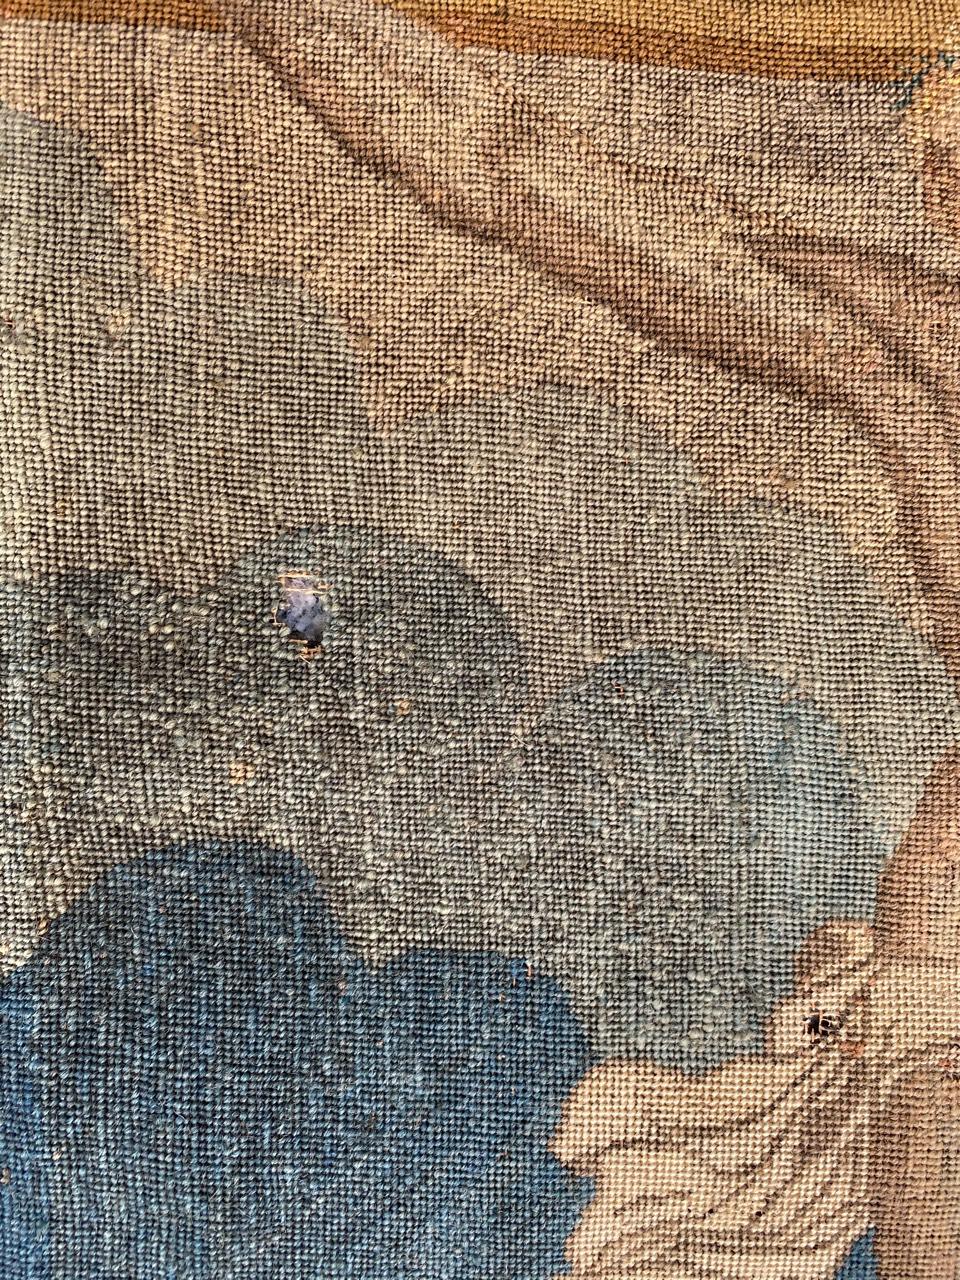 Nice Antique 18th Century Needlepoint Tapestry 1